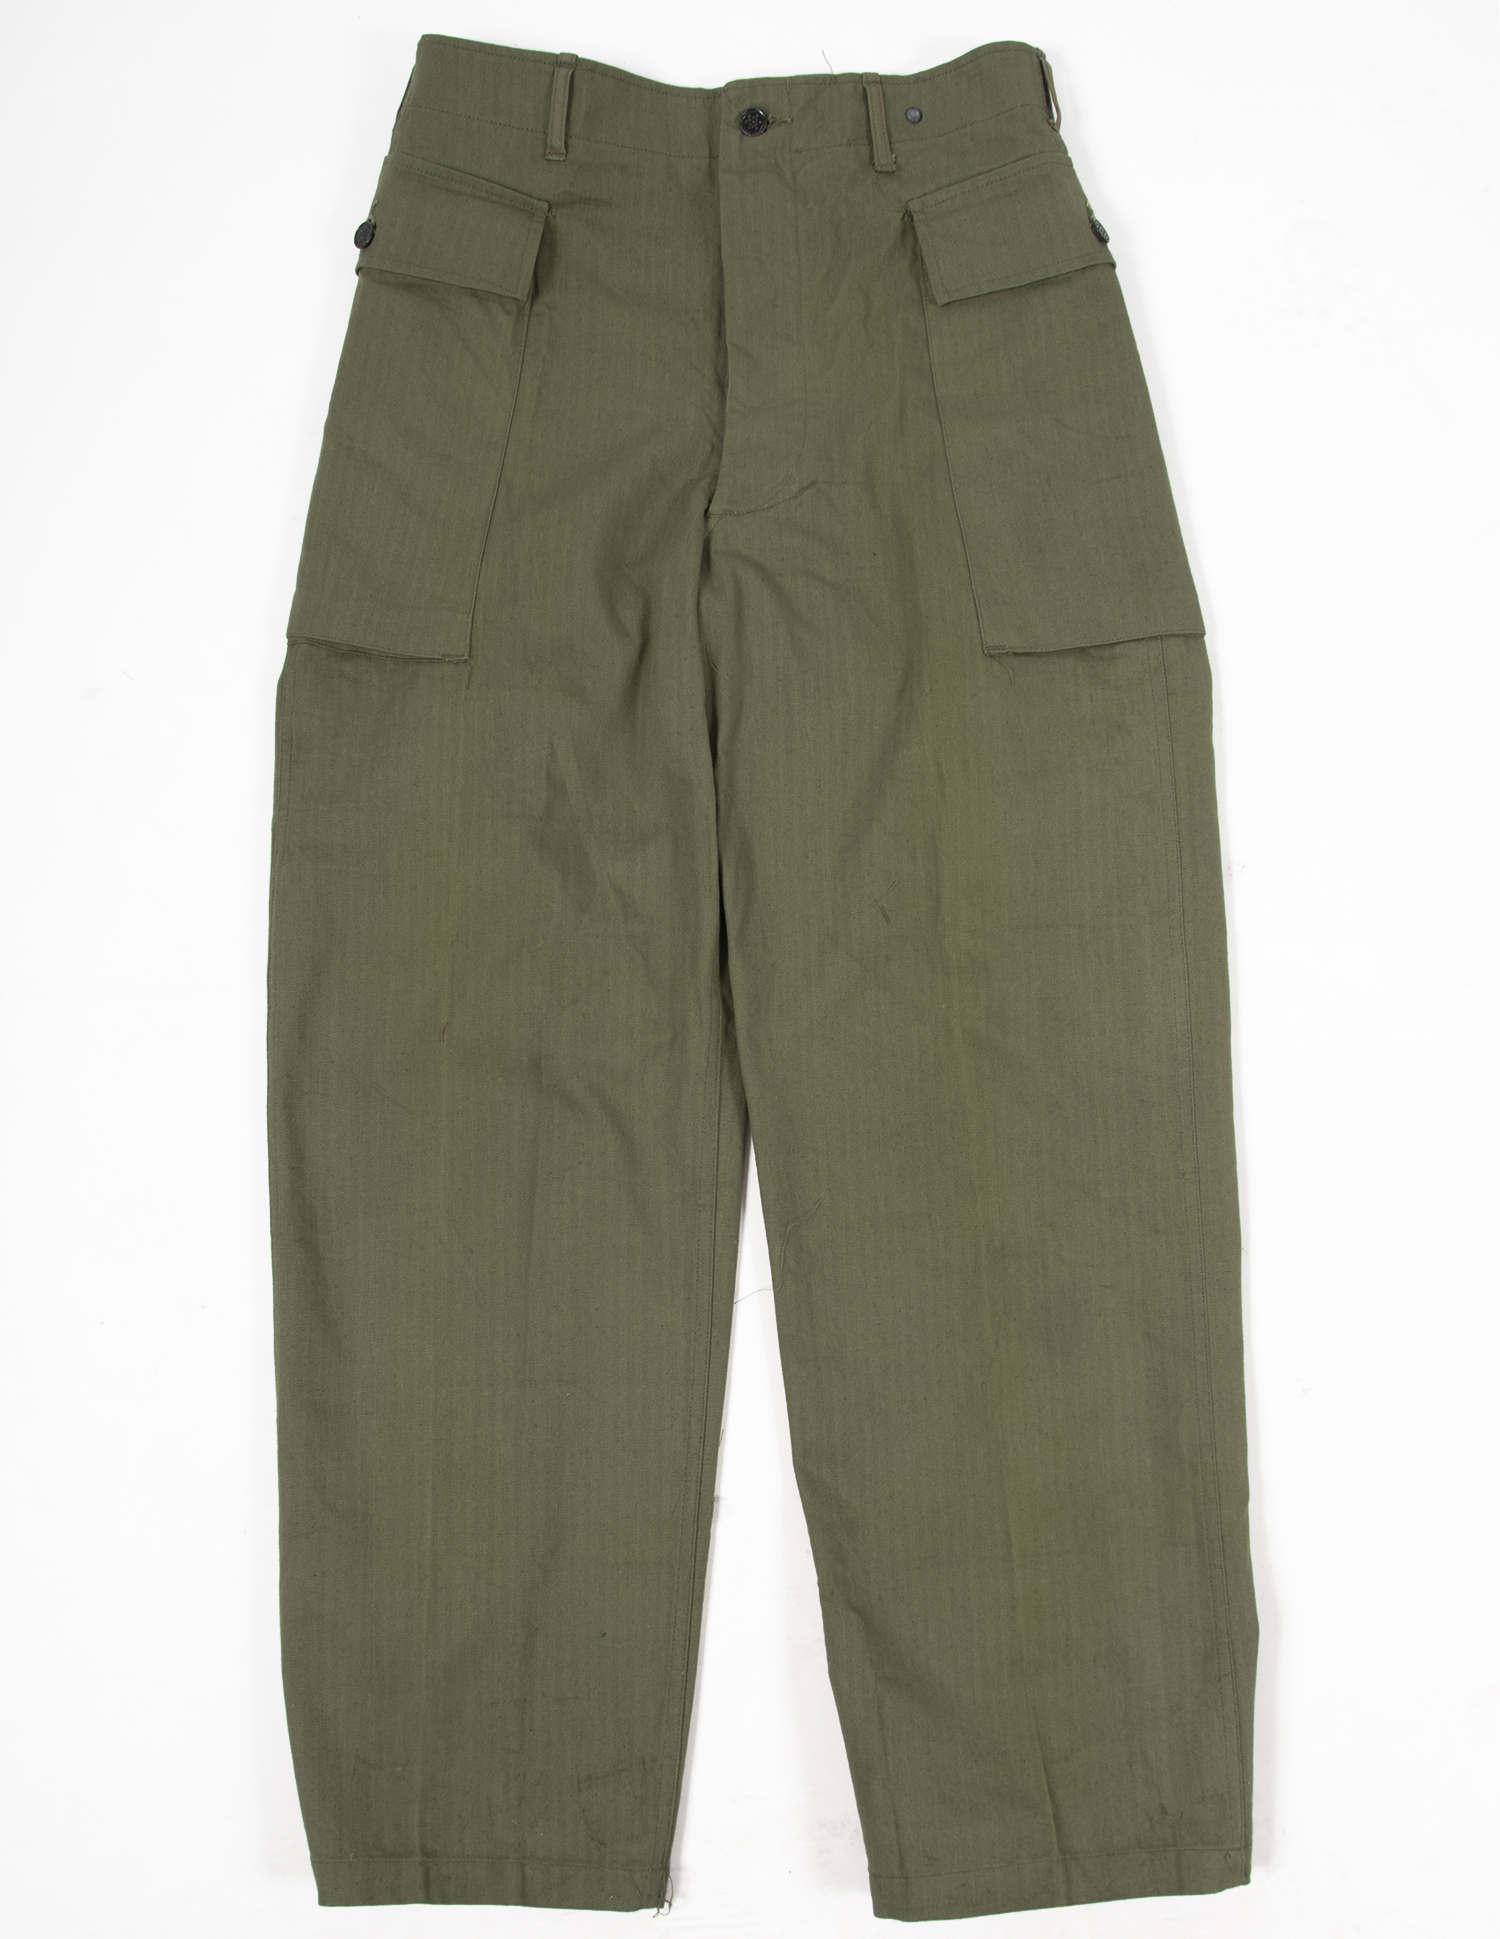 WW2 WWII US MILITARY ARMY GREEN HBT FIELD PANTS TACTICAL TROUSERS 